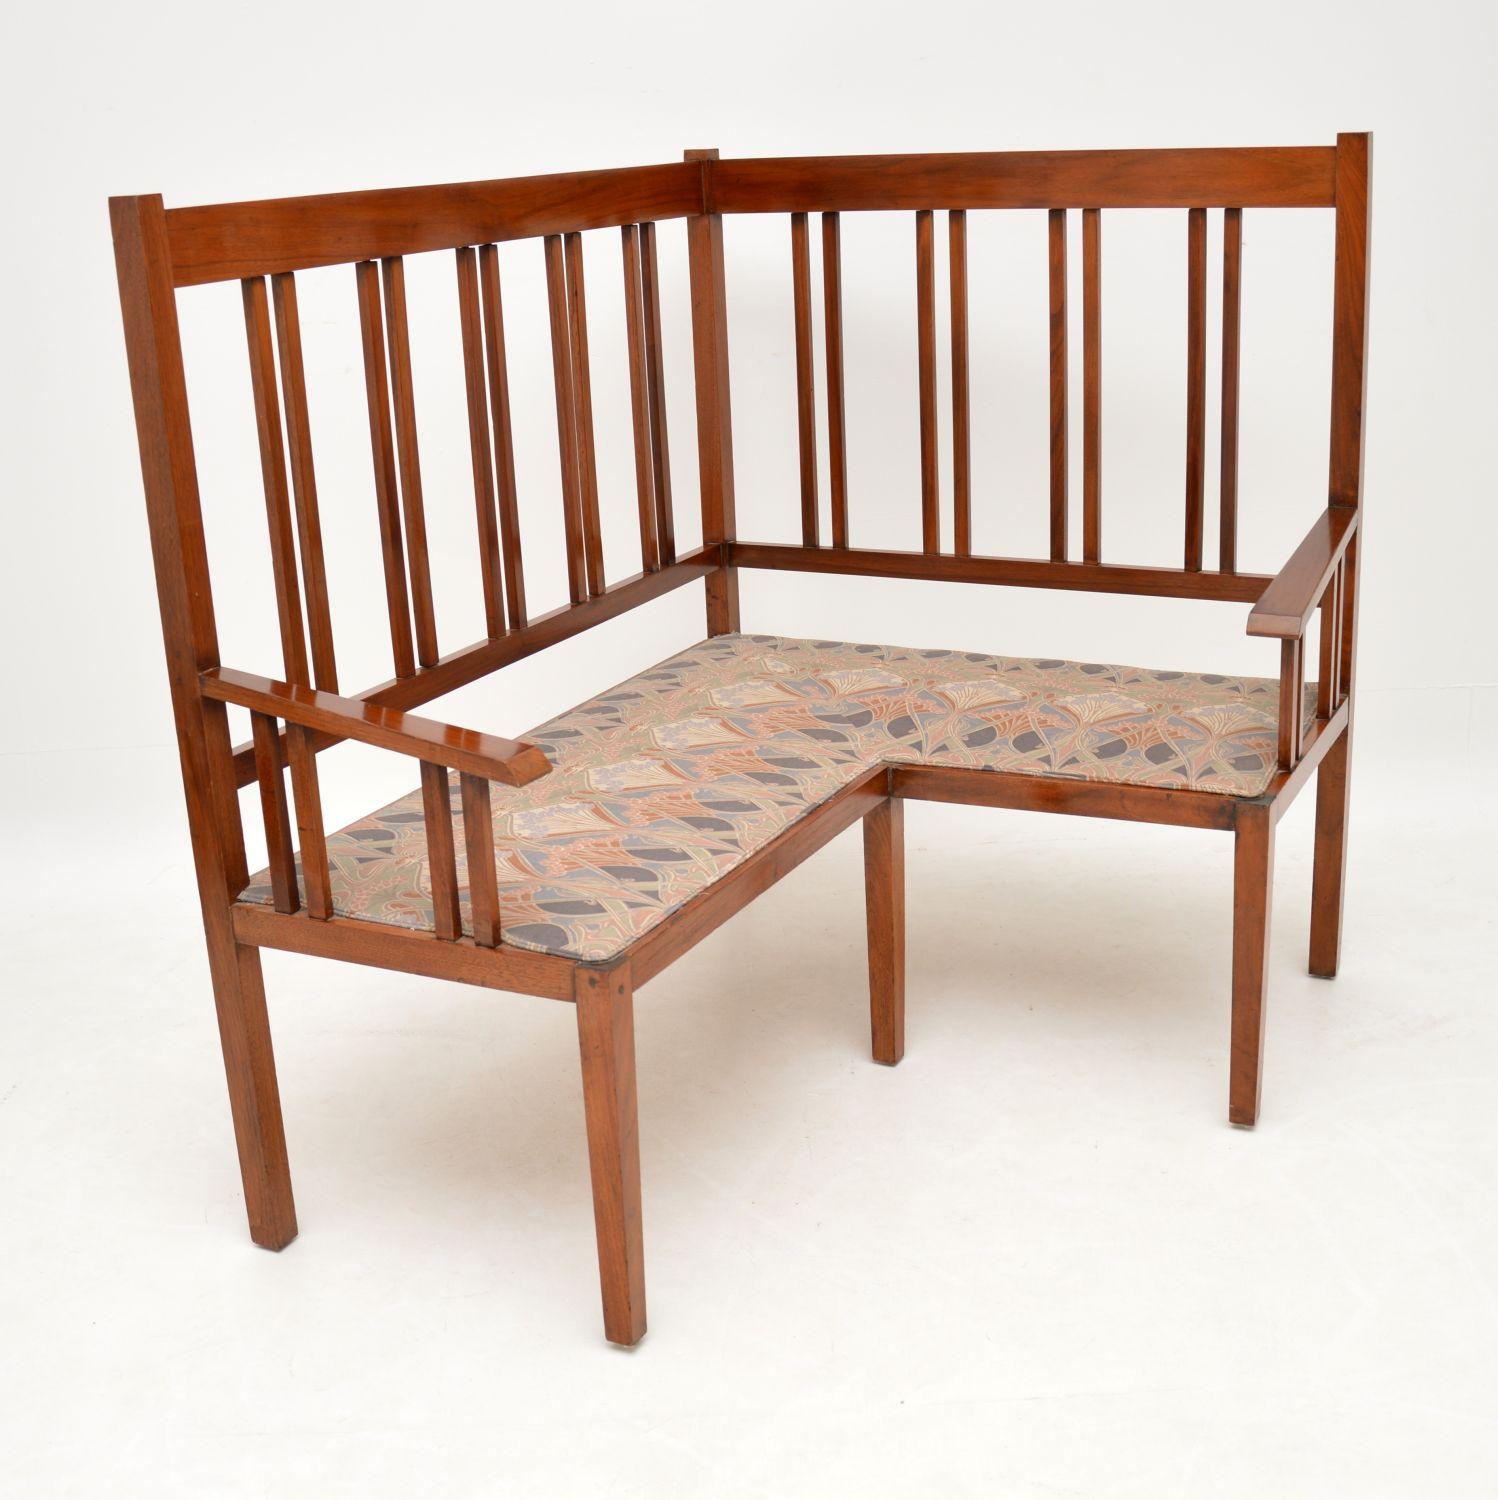 Antique Arts & Crafts corner settee in sold walnut and in good original condition.

This settee even has a William Morris design fabric on the seat, which I shouldn’t think is original, but is never-the-less perfect for this piece.

The frame is